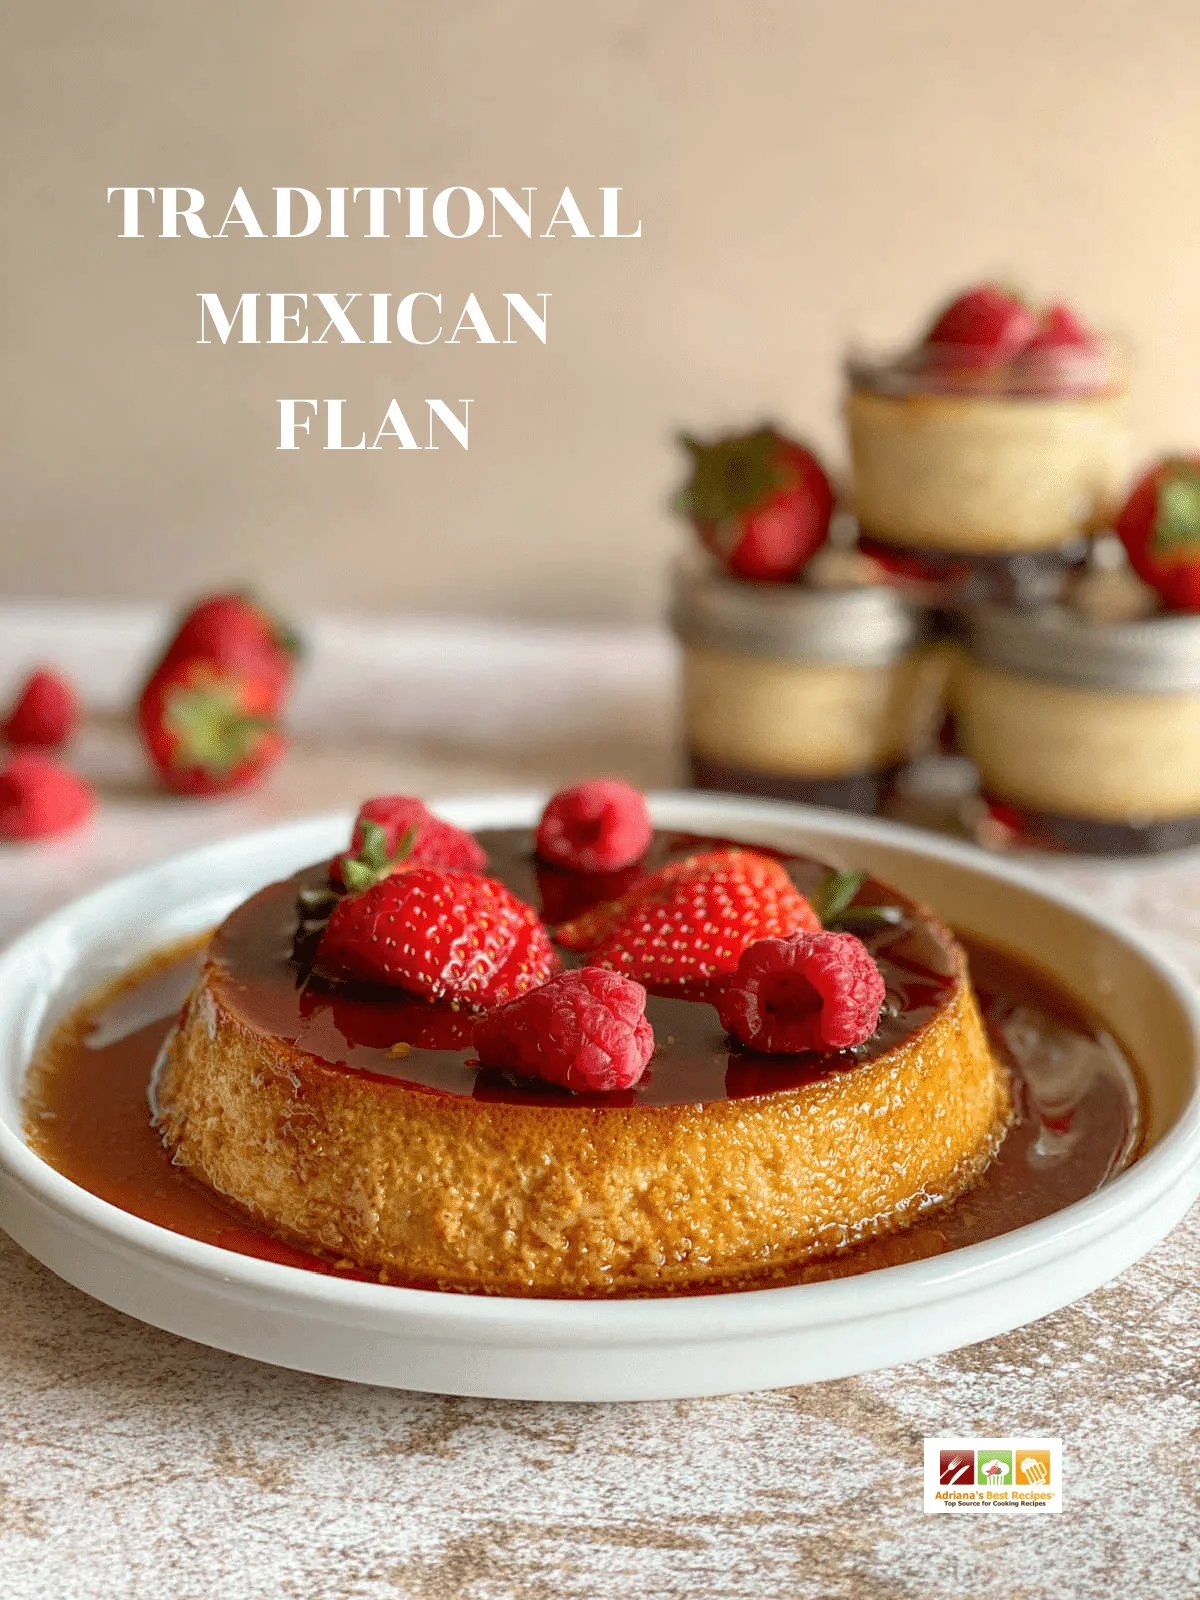 Flan Recipe {The BEST!} - Cooking Classy